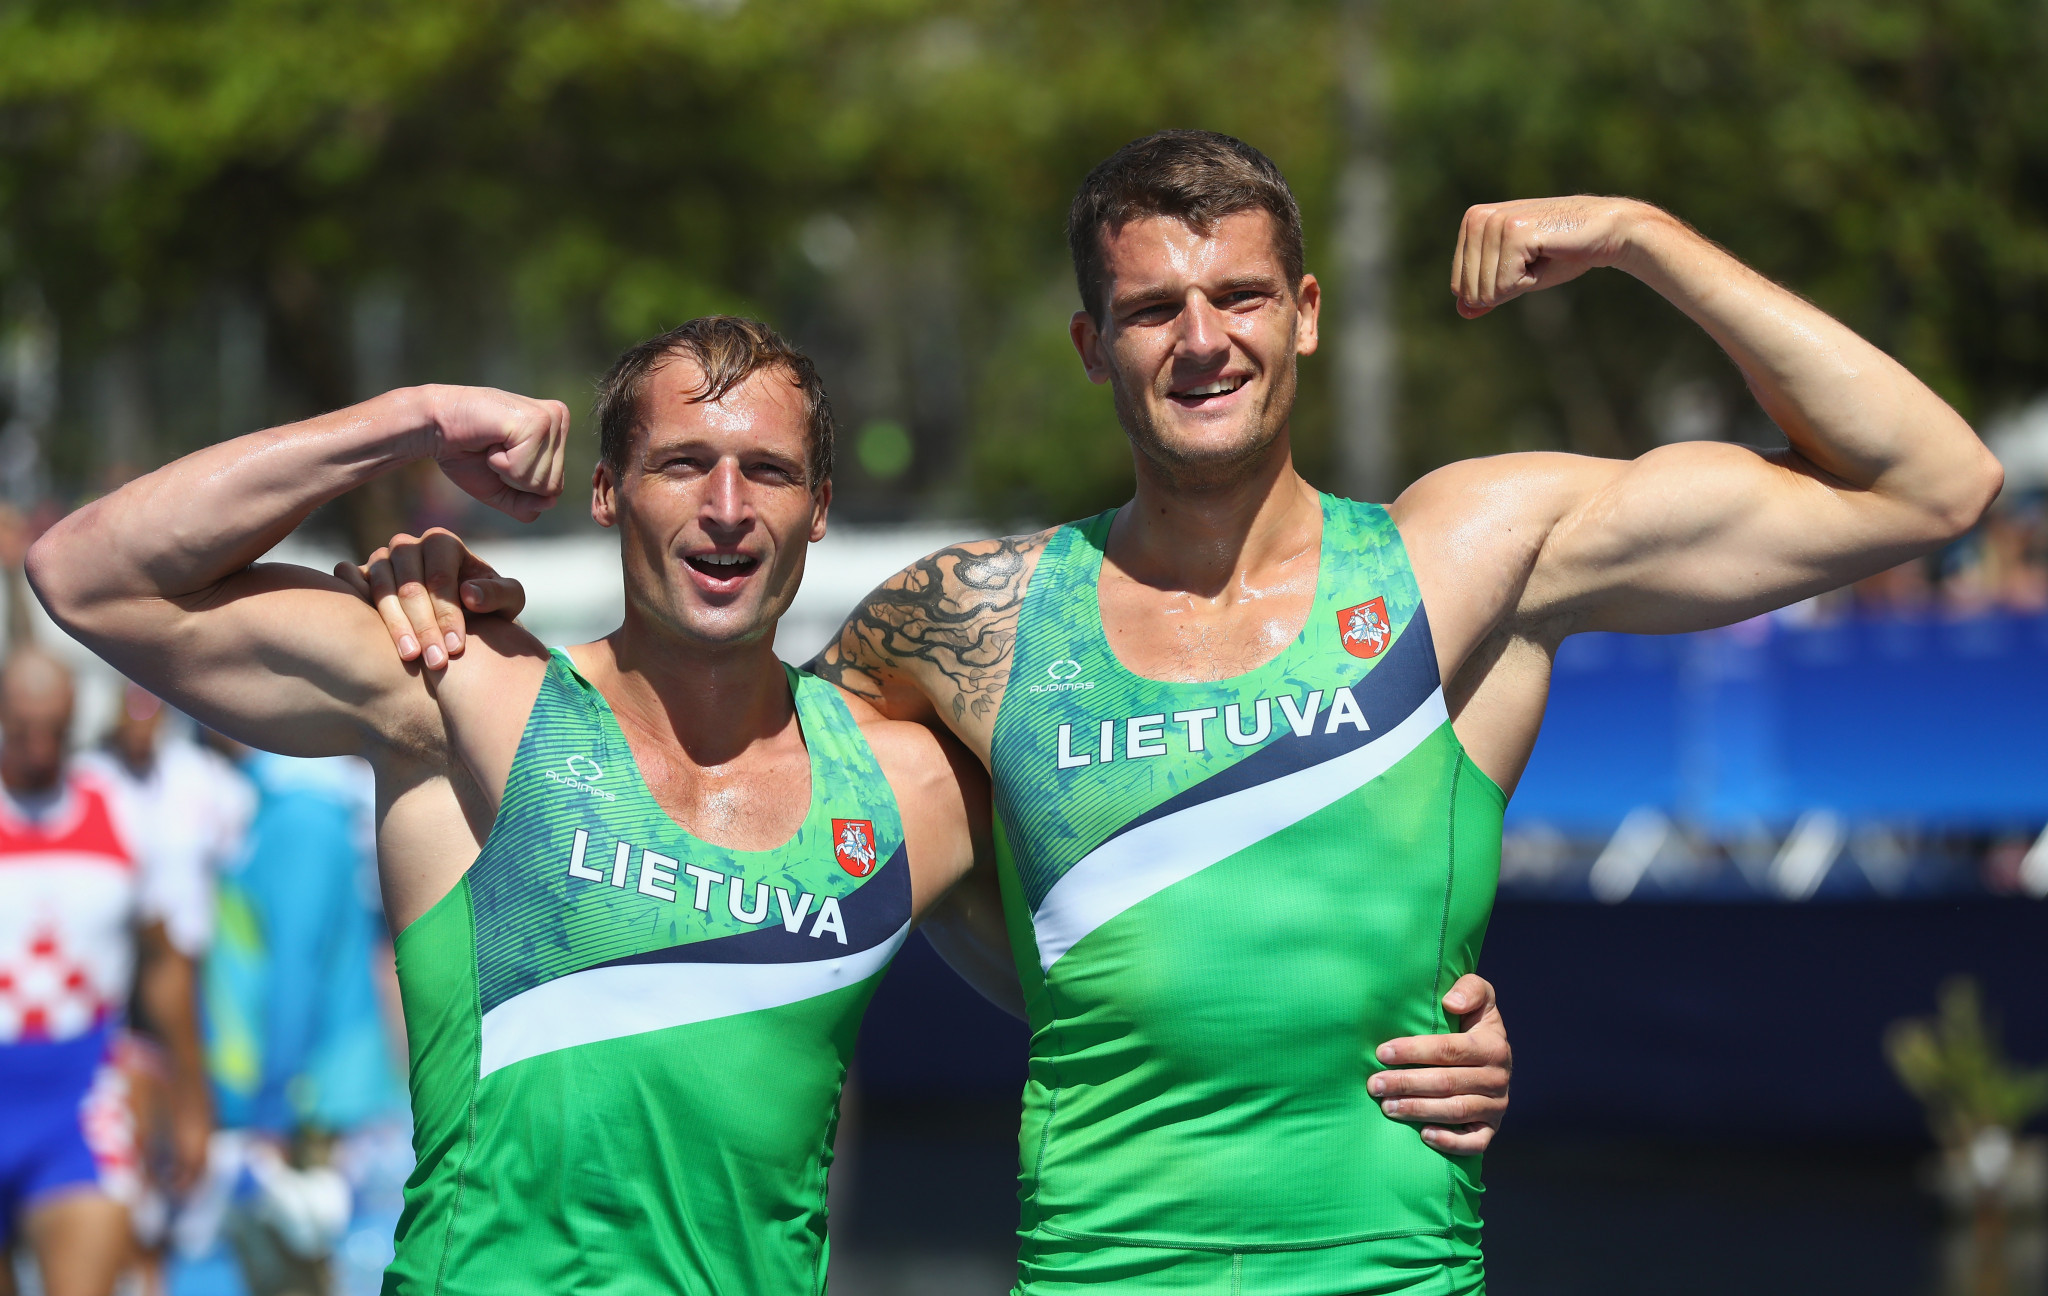 Olympic silver medallists Saulius Ritter and Mindaugas Griskonis made it through their heat in the men's double sculls ©Getty Images